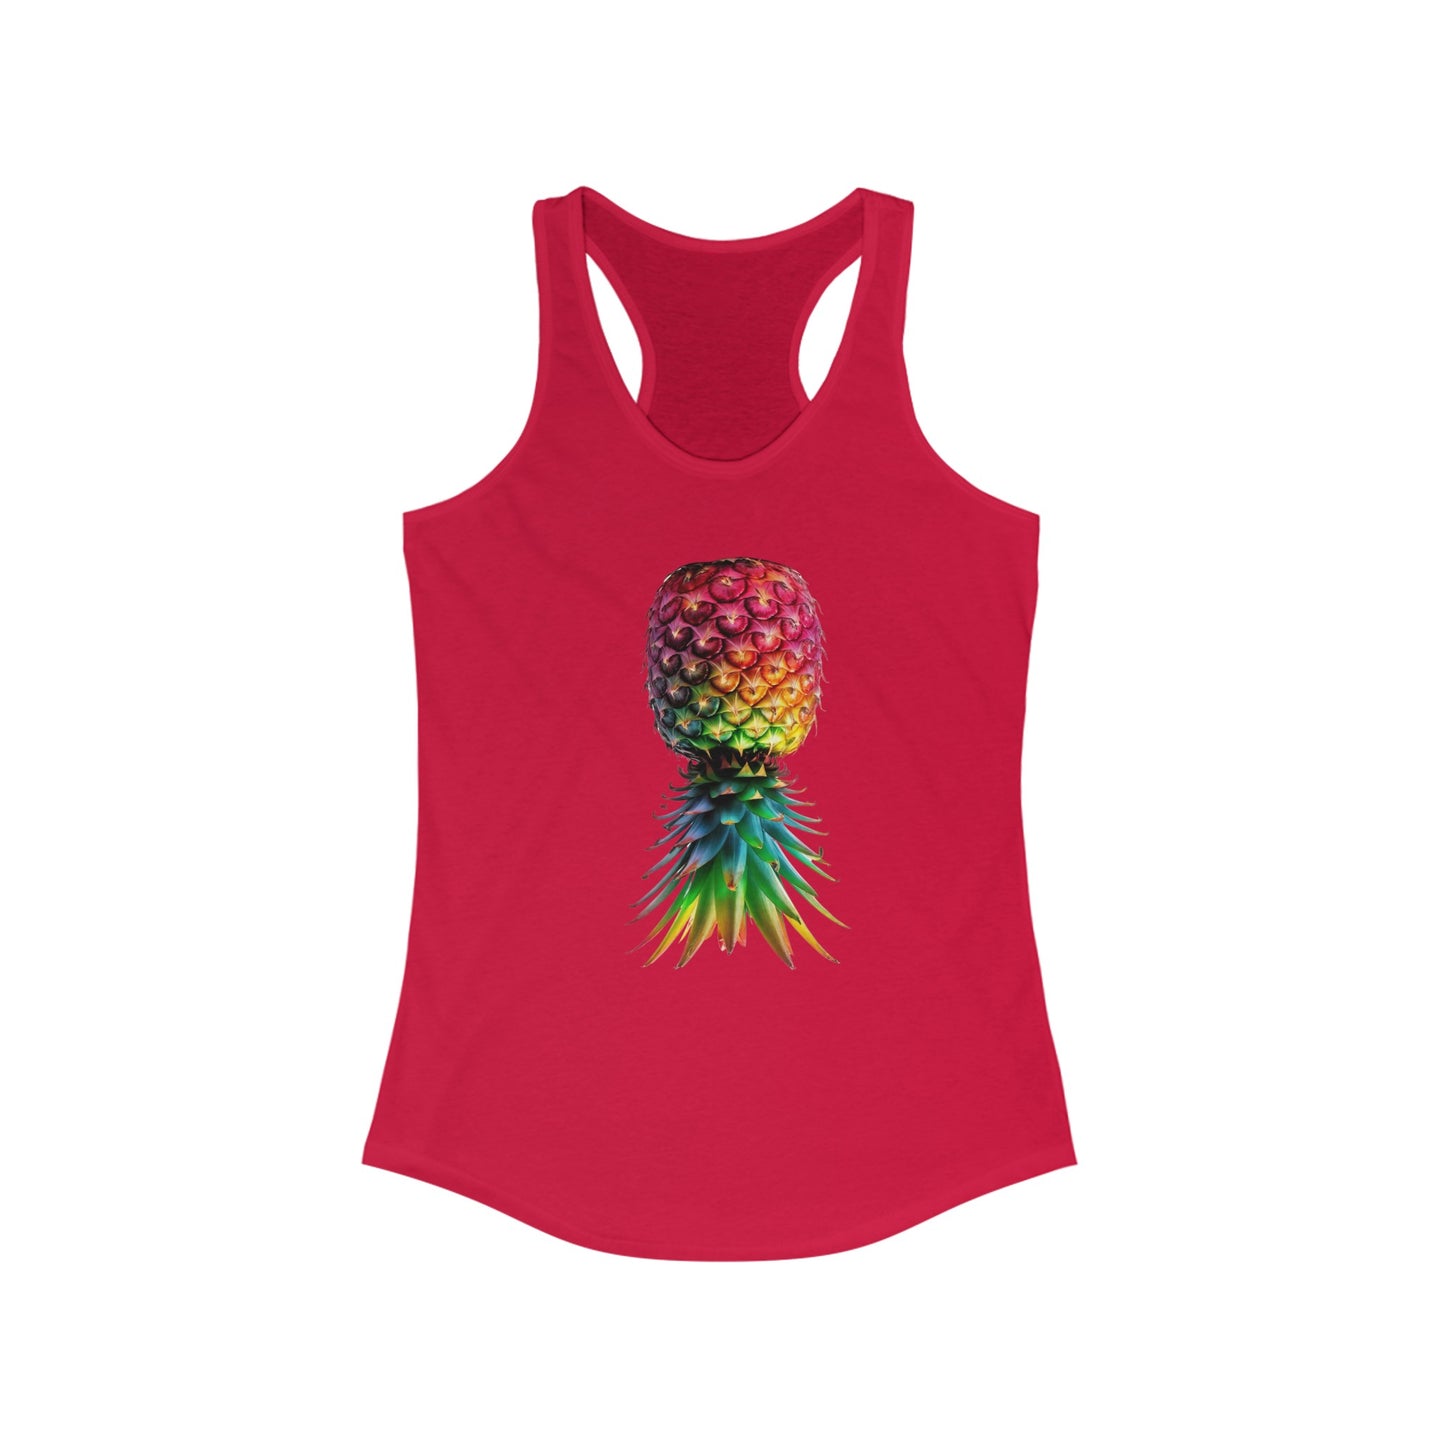 The Stamina for Men Women's Upside-down Pineapple red Top | QOS front view